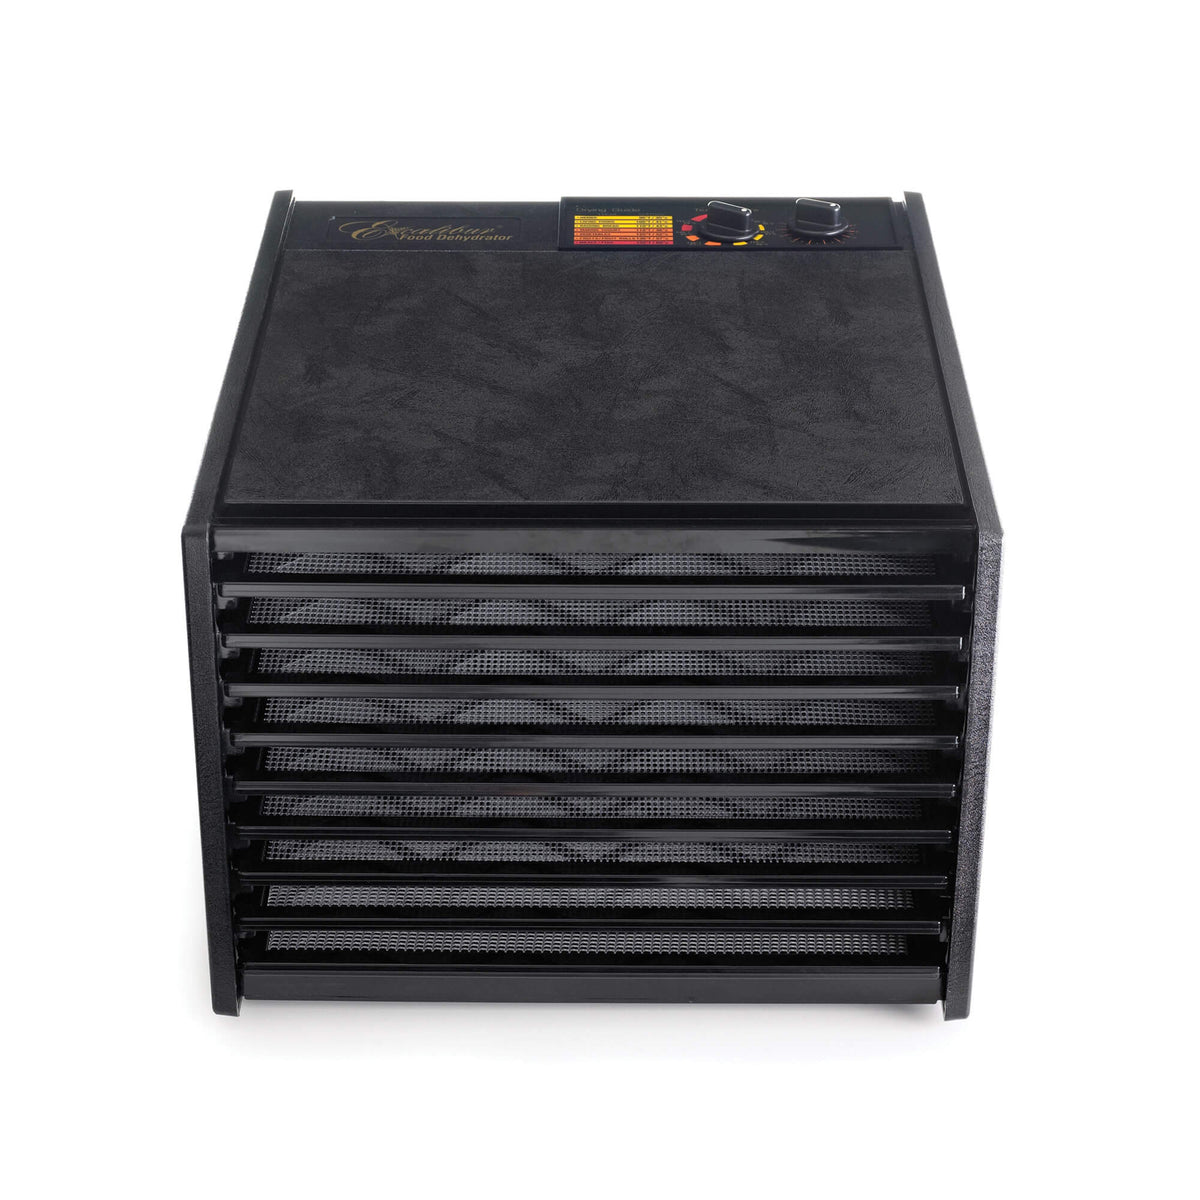 Excalibur 4926TB black 9 tray dehydrator front view with door open and trays in.